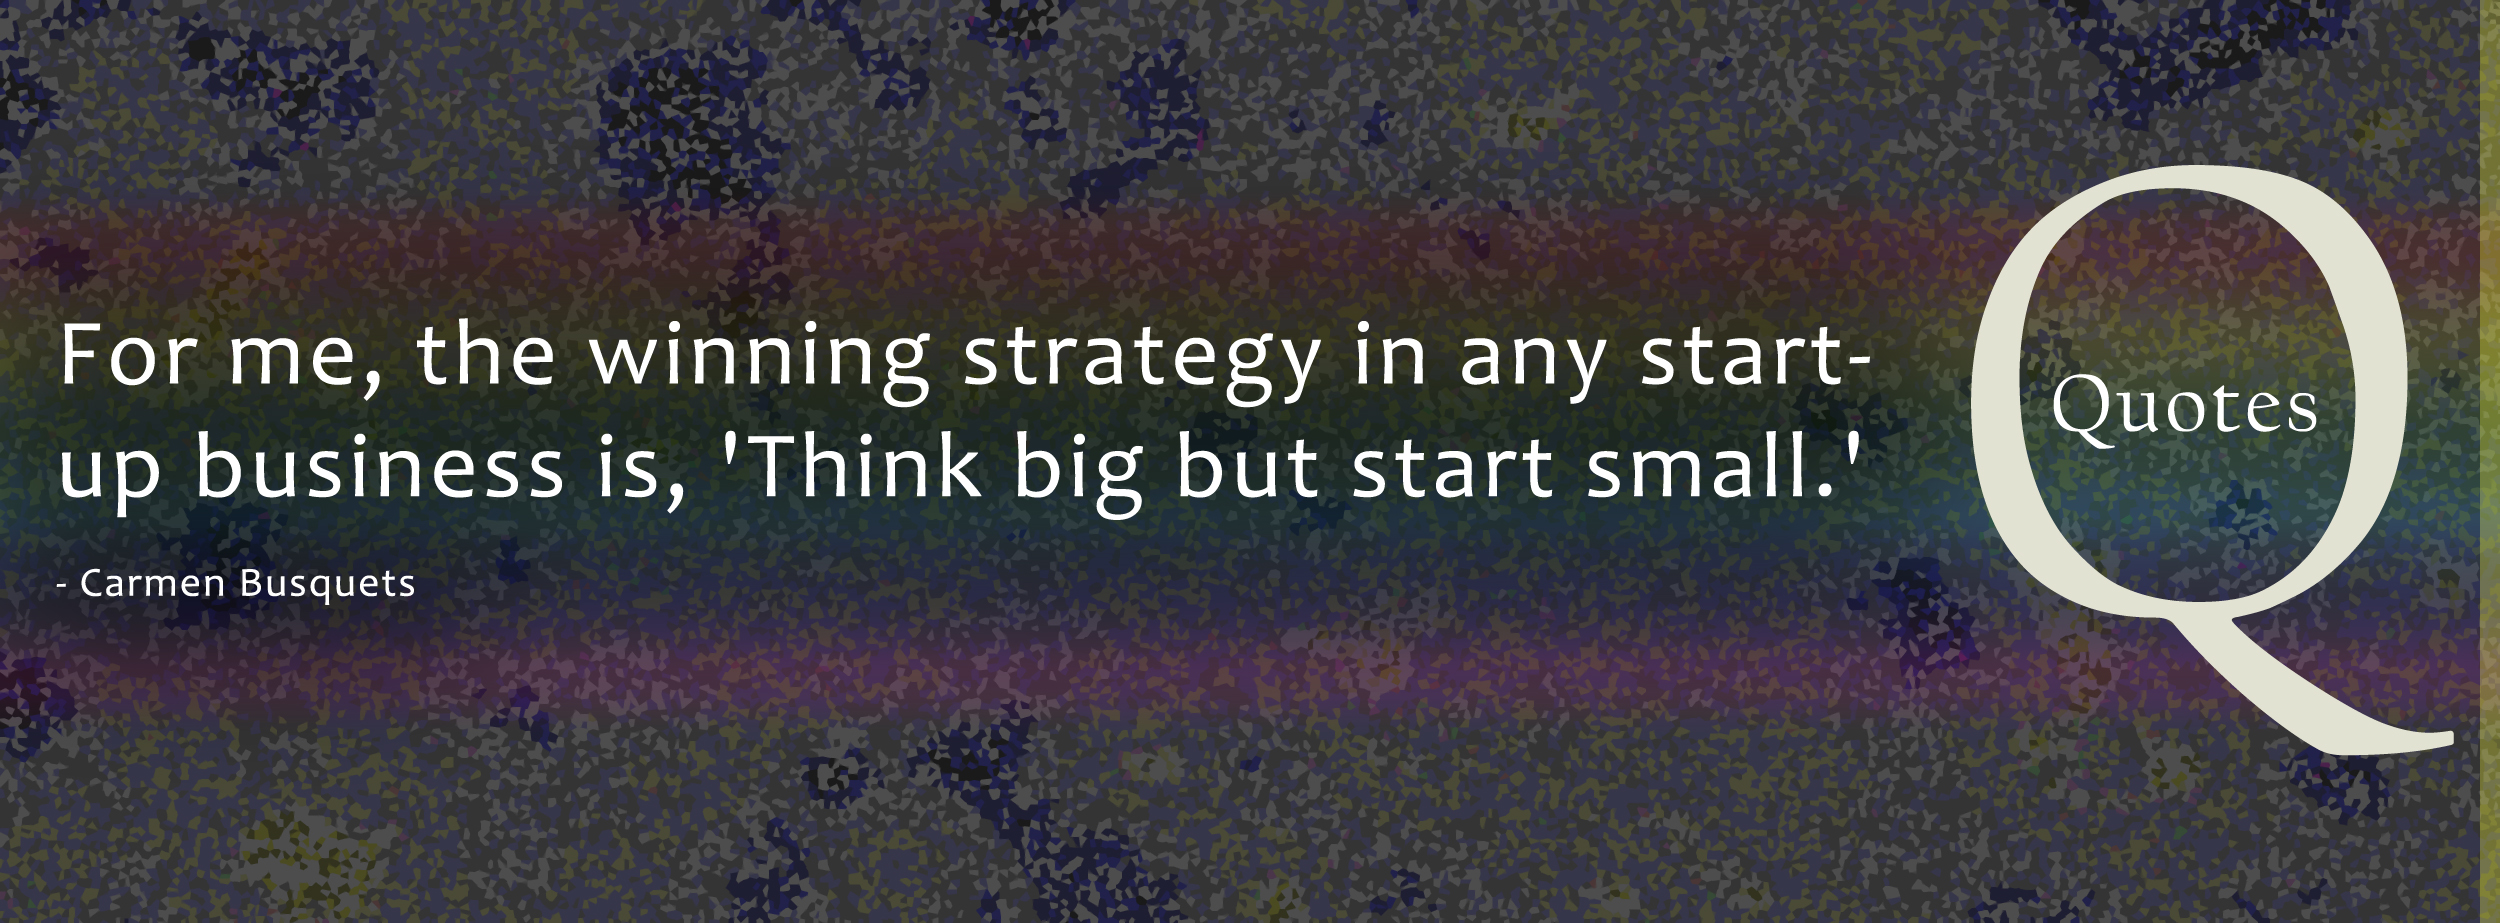 Winning strategy for startup